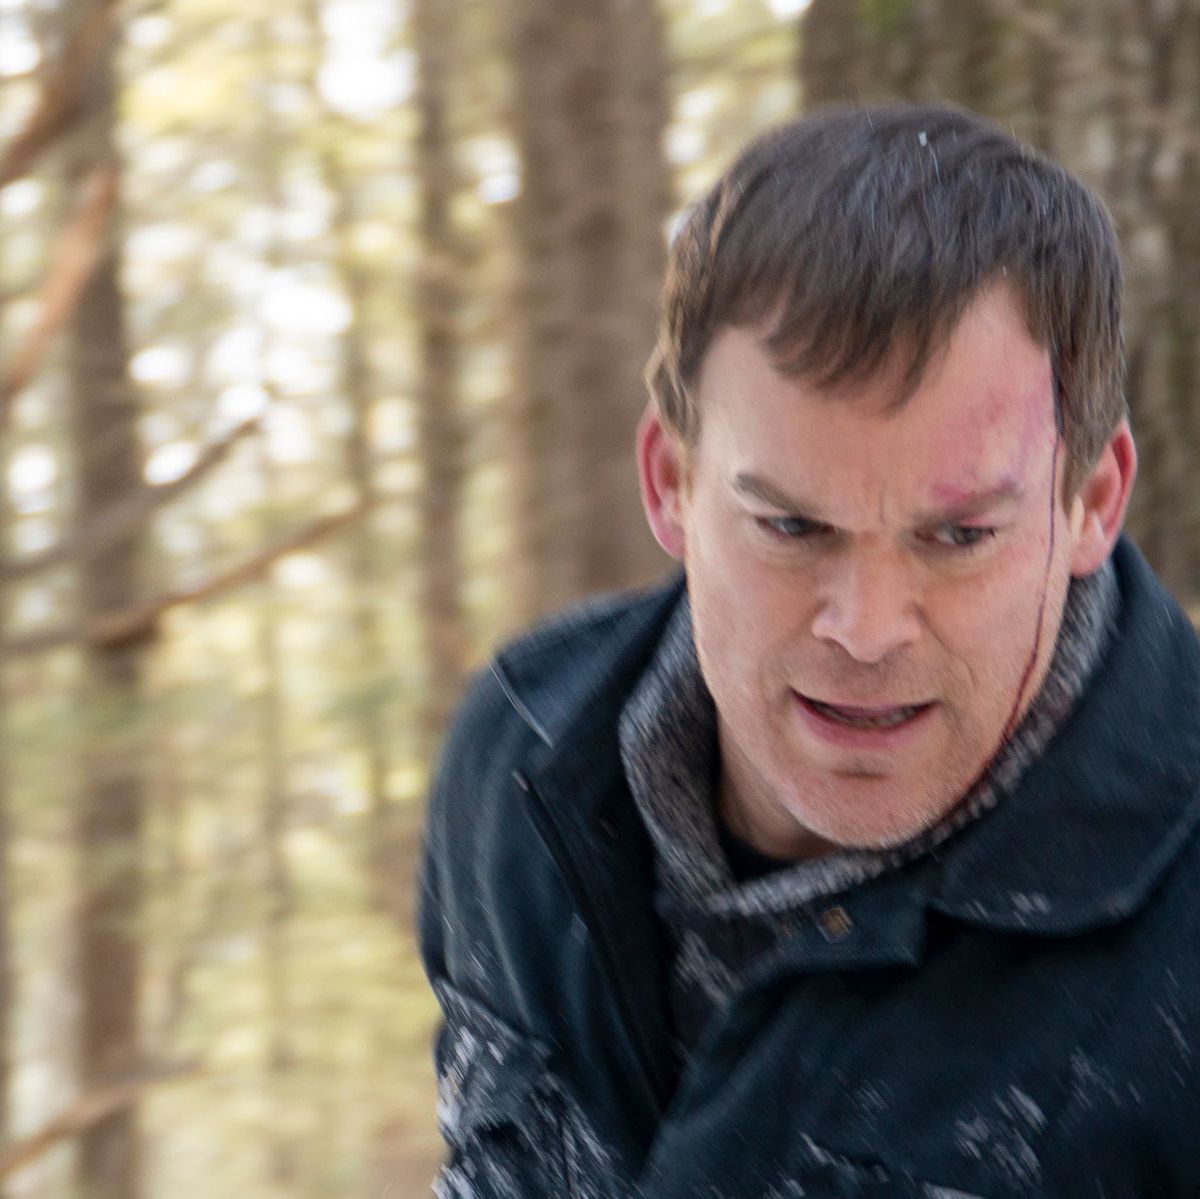 Dexter: New Blood future revealed following season 2 speculation